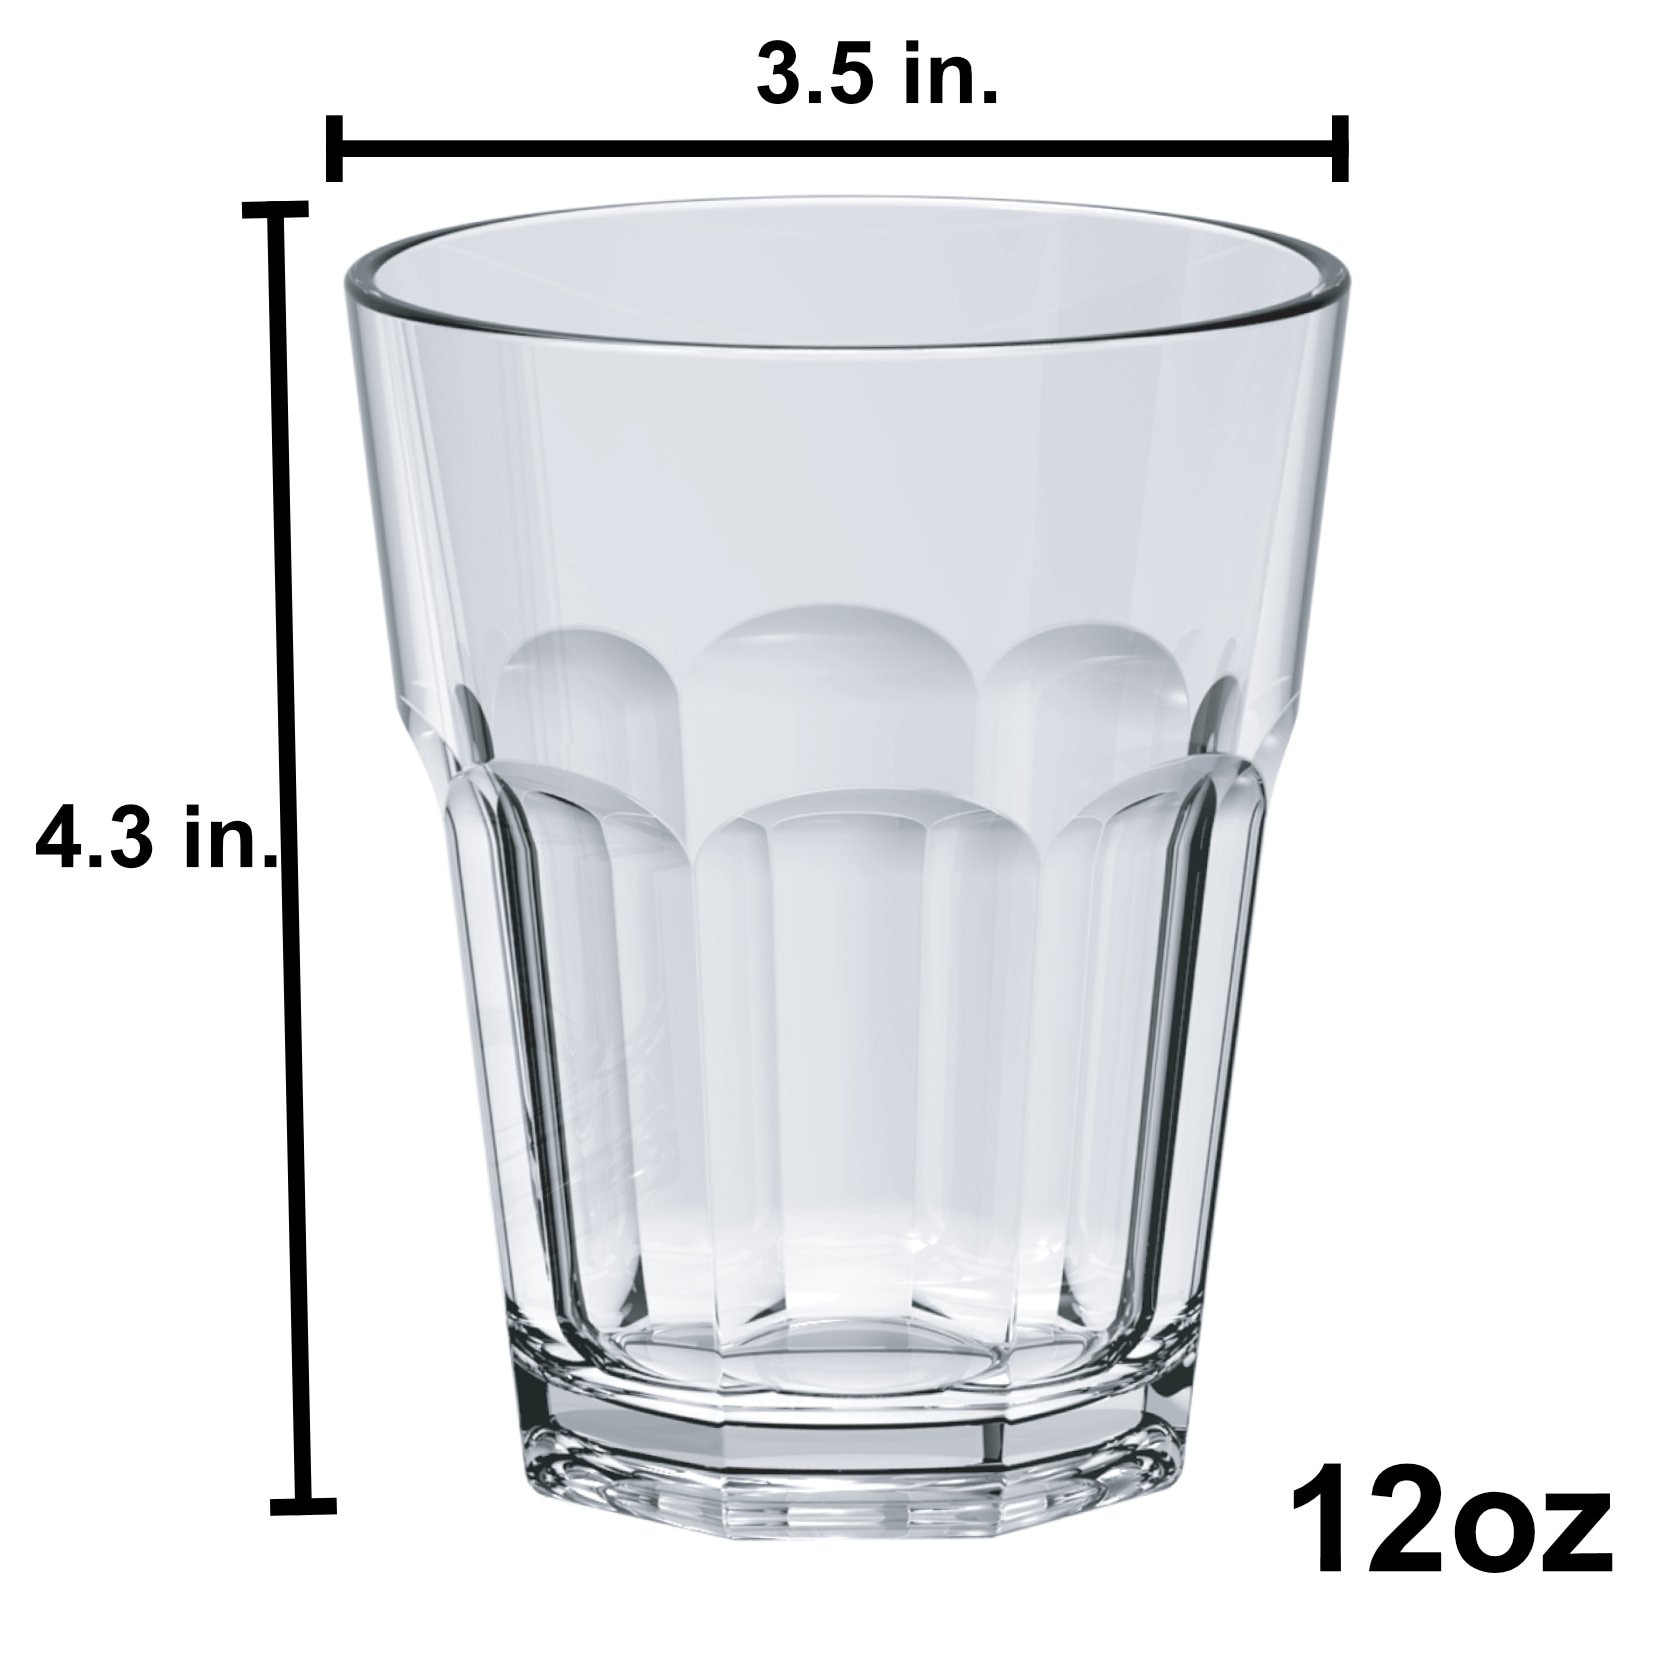 Vikko 9.5 Ounce Water Tumblers | All Purpose Drinking Glasses Thick and  Durable Construction Tapered Design Dishwasher Safe Set of Six Tall Glass